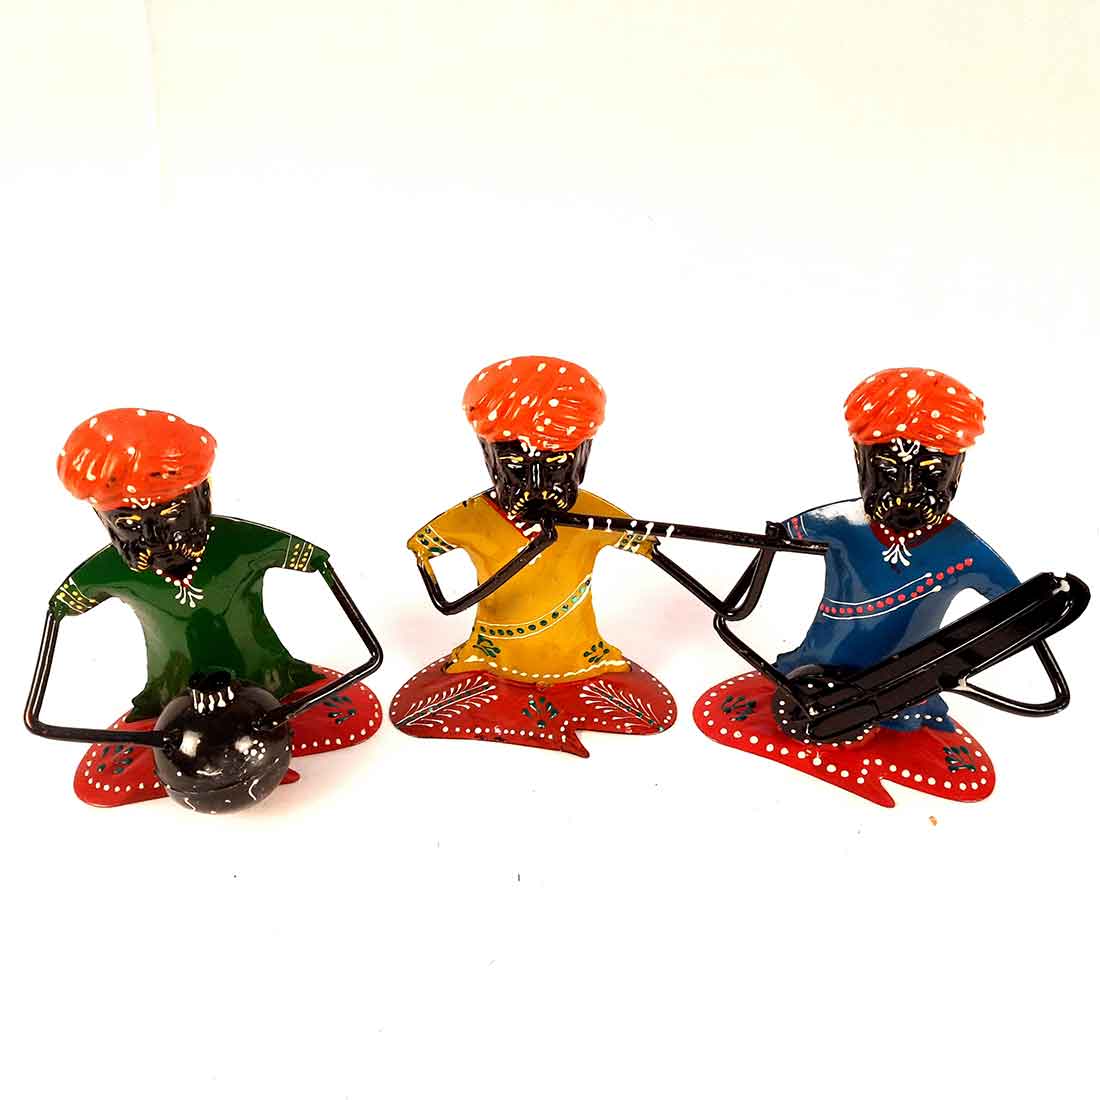 Rajasthani Musicians Figurines | Decorative Showpiece - for Home, Bedroom, Living Room, Office Desk & Table | Gifts For Wedding, Housewarming & Festivals - 7 Inch - Apkamart #Style_Pack of 3